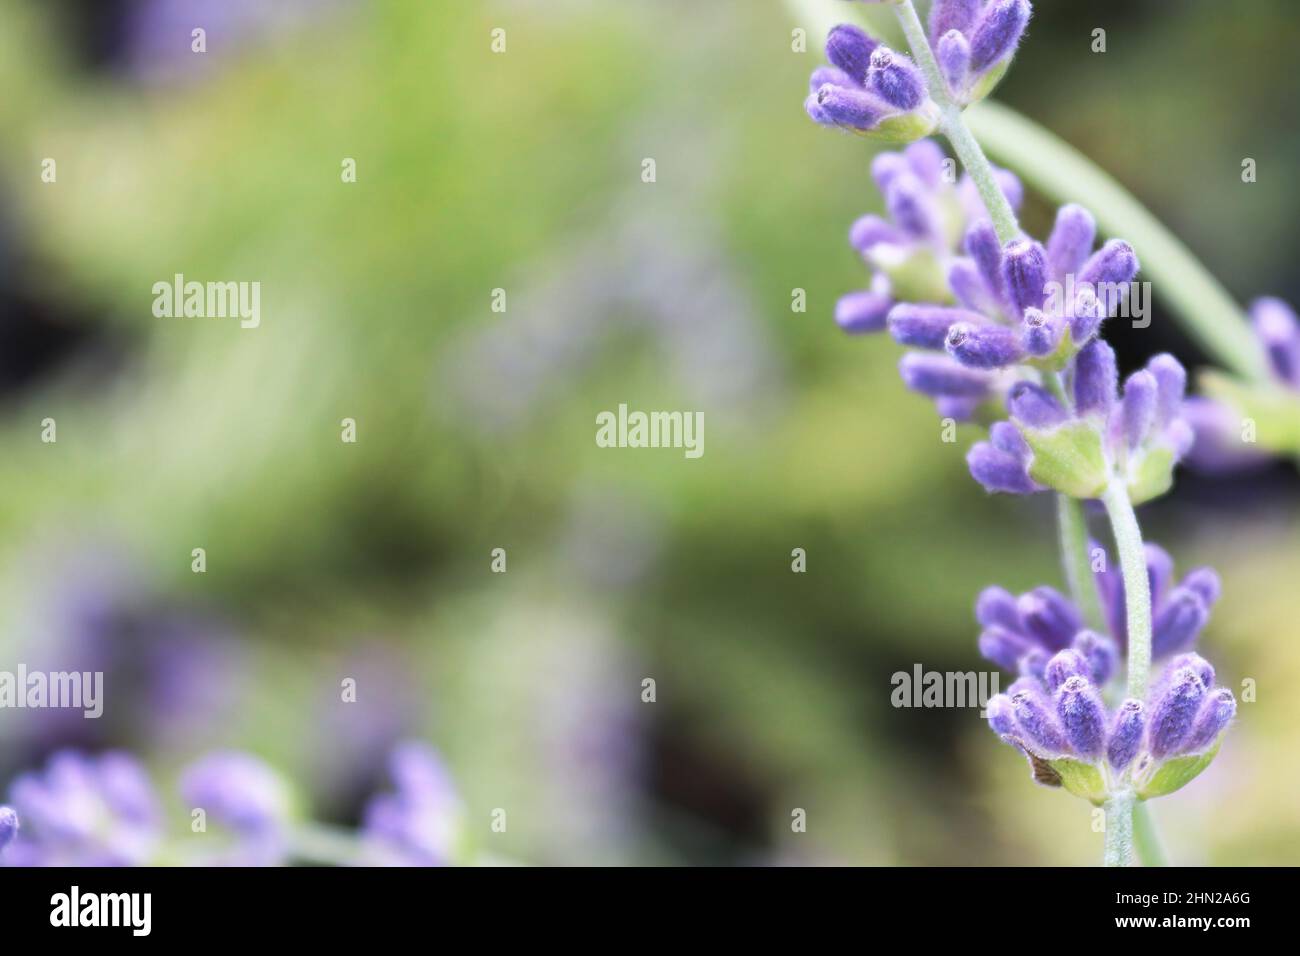 Macro side view of lavender growing in the garden Stock Photo